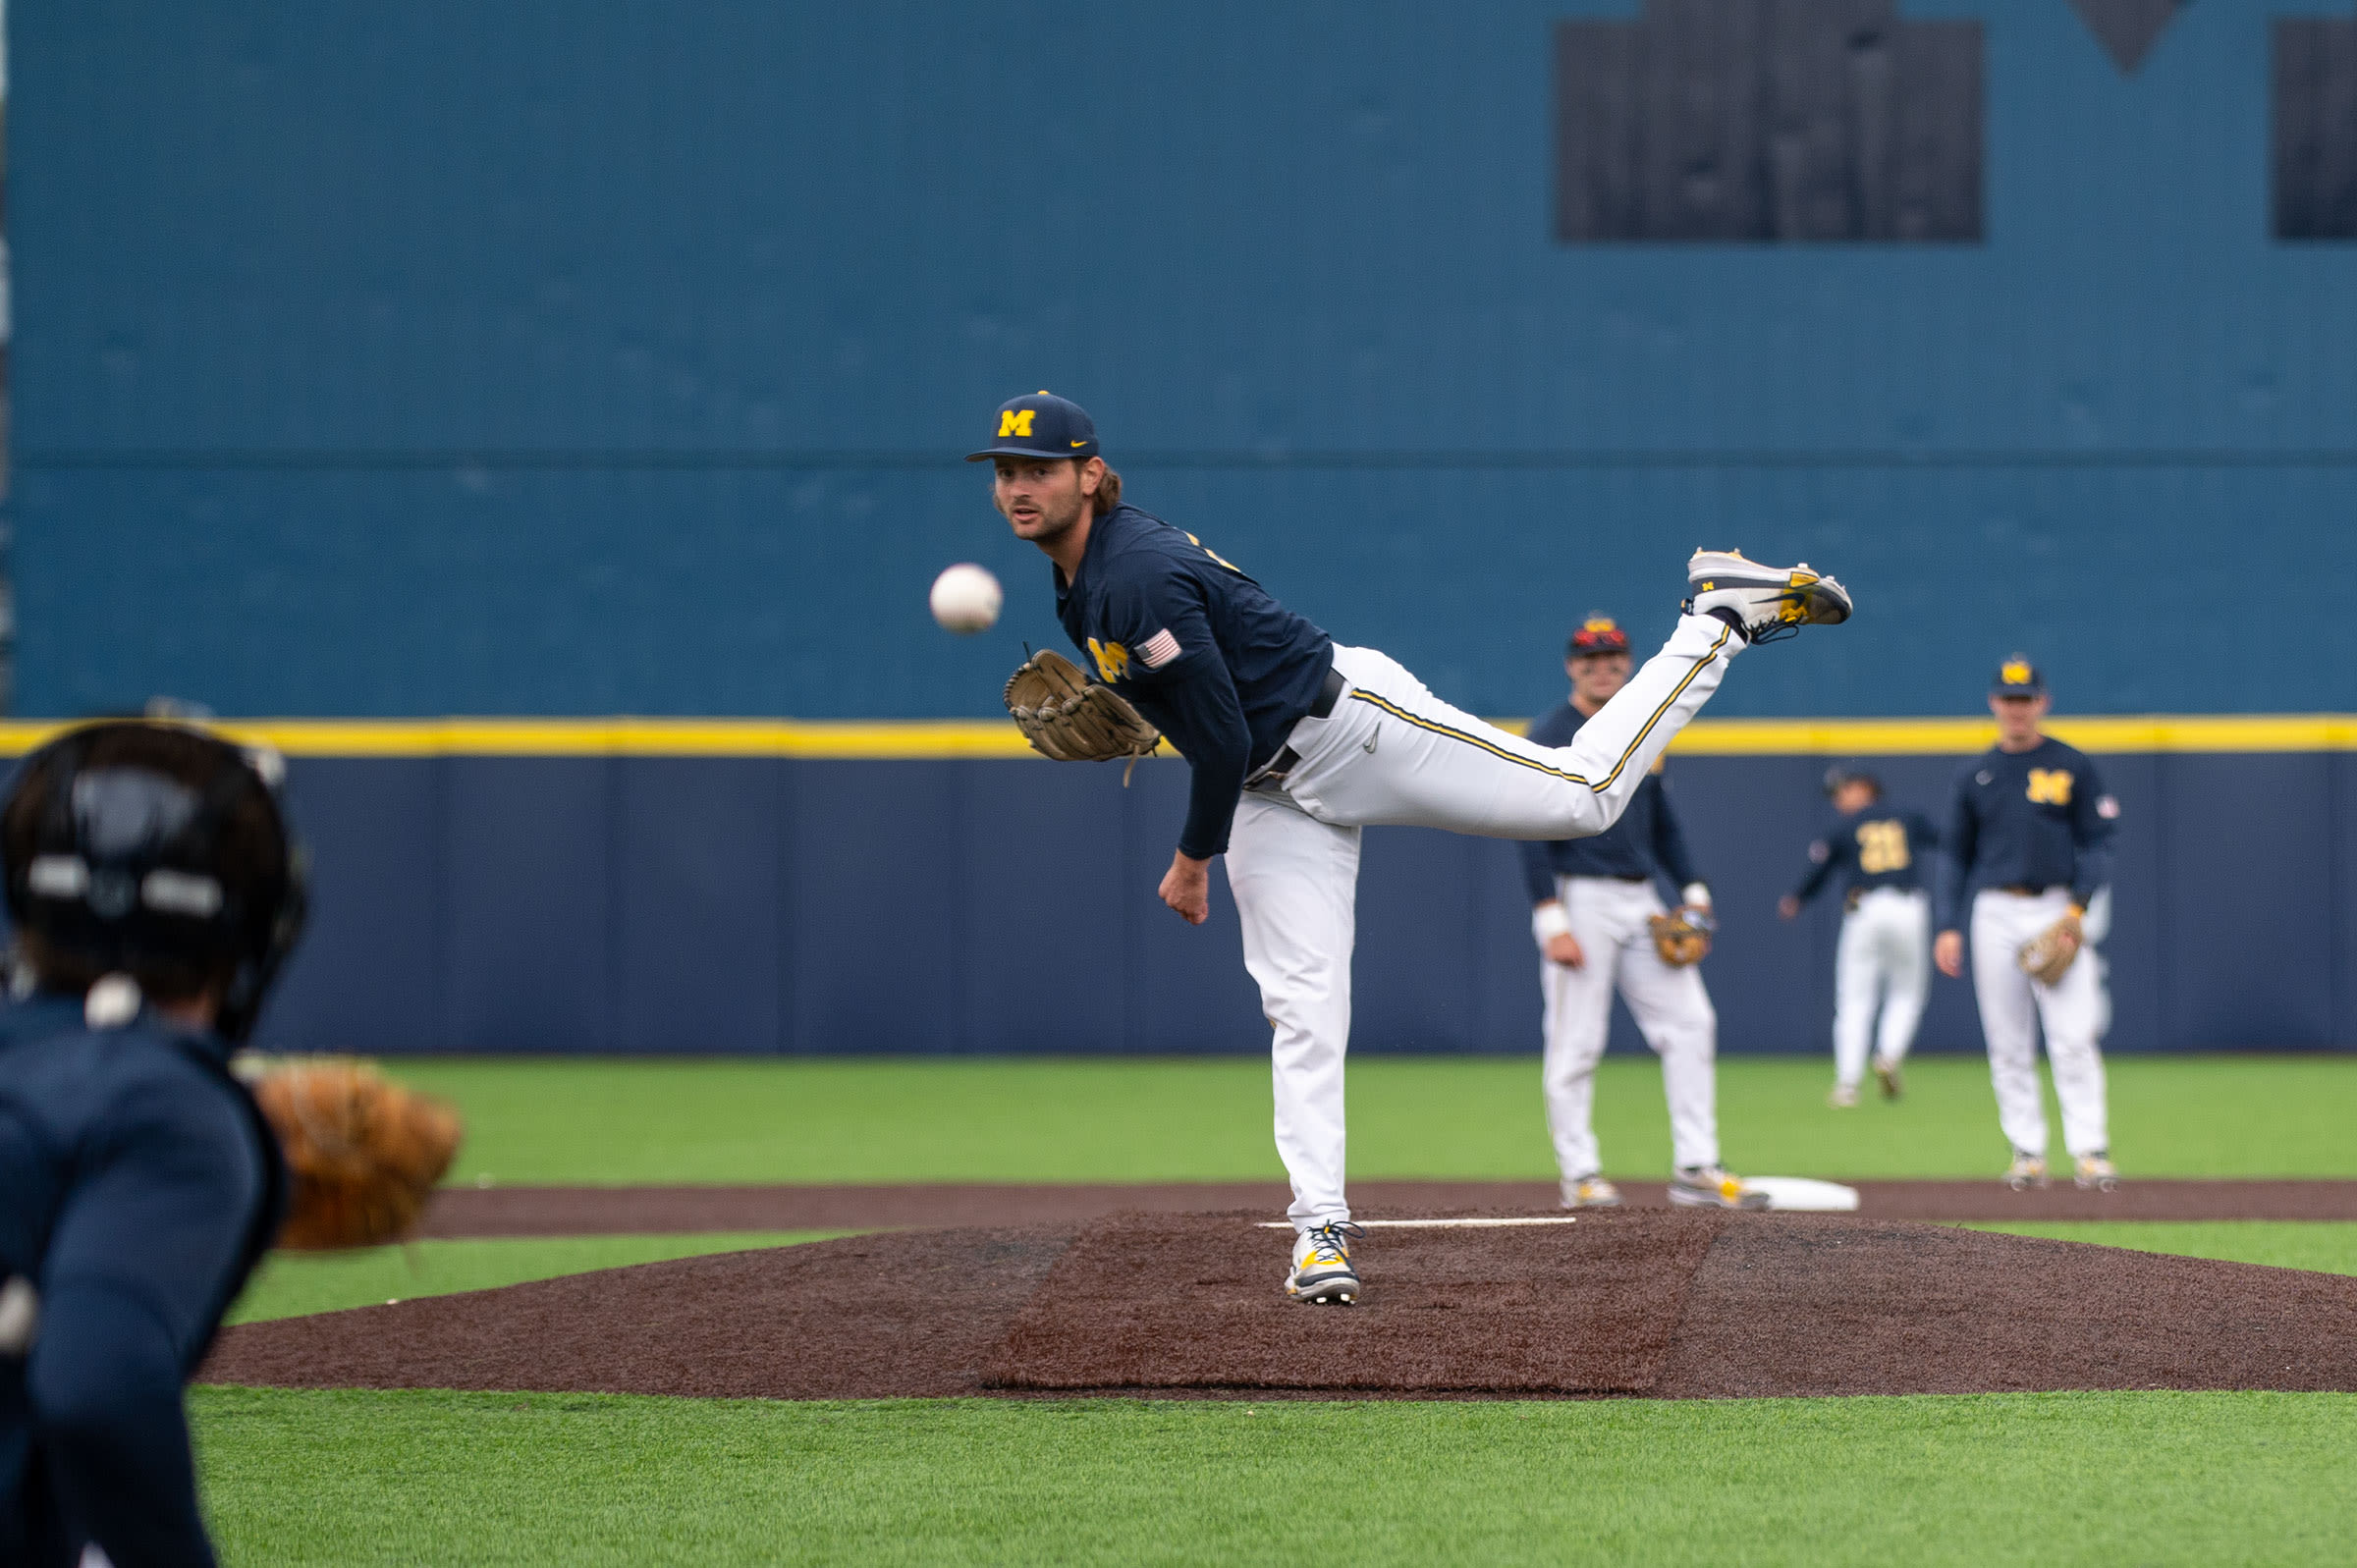 Jacob Denner holds Michigan steady in a back-and-forth affair